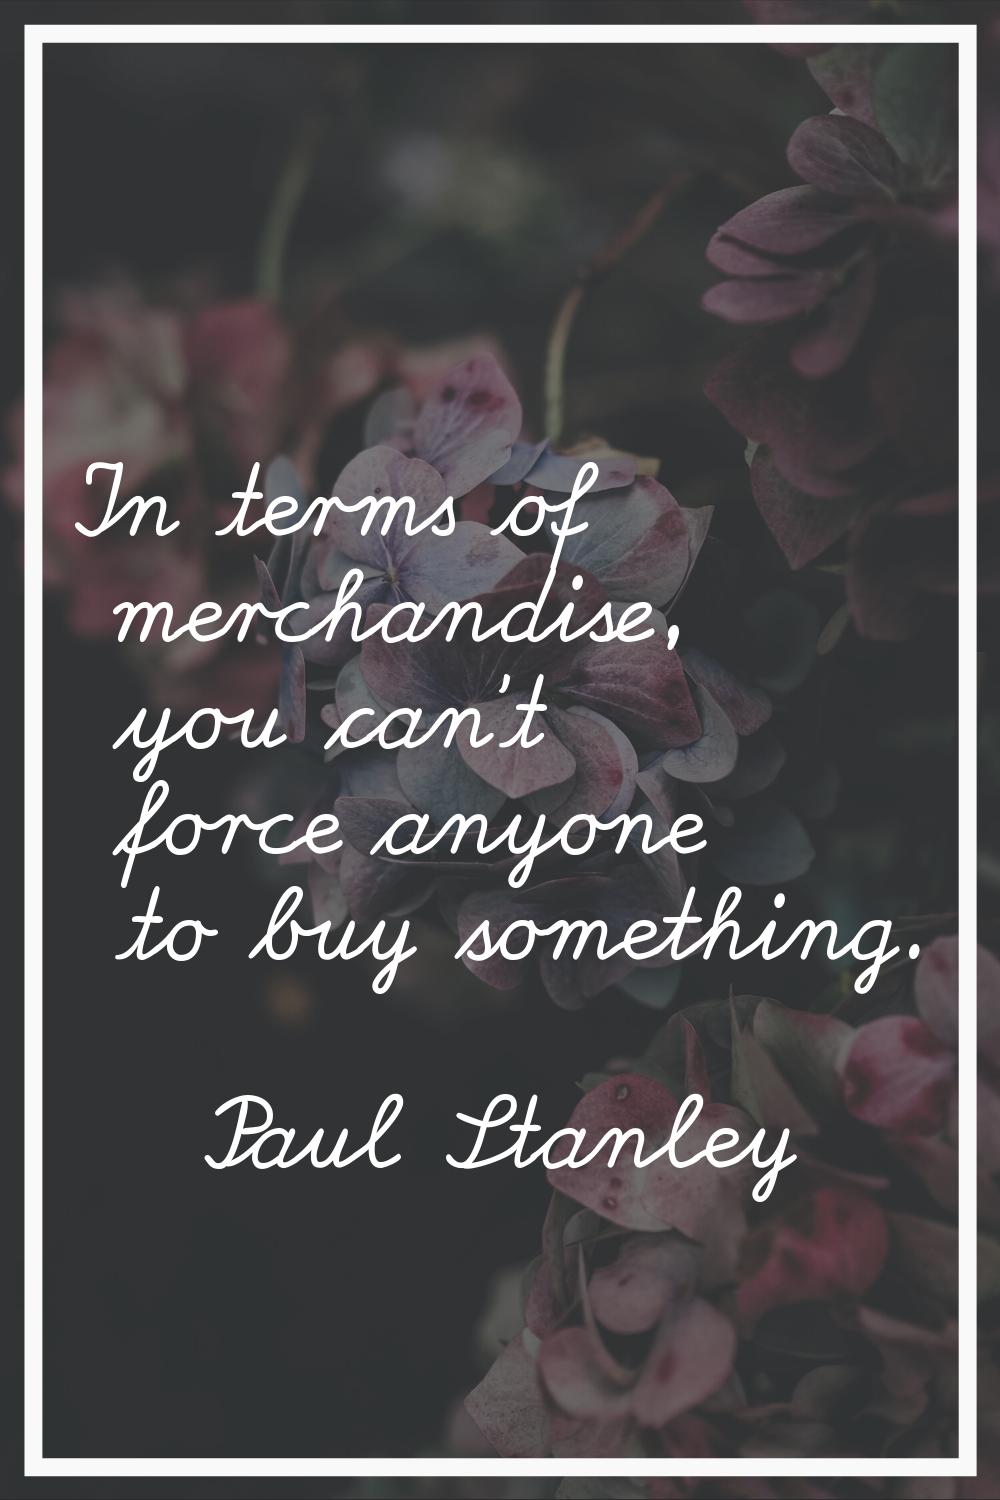 In terms of merchandise, you can't force anyone to buy something.